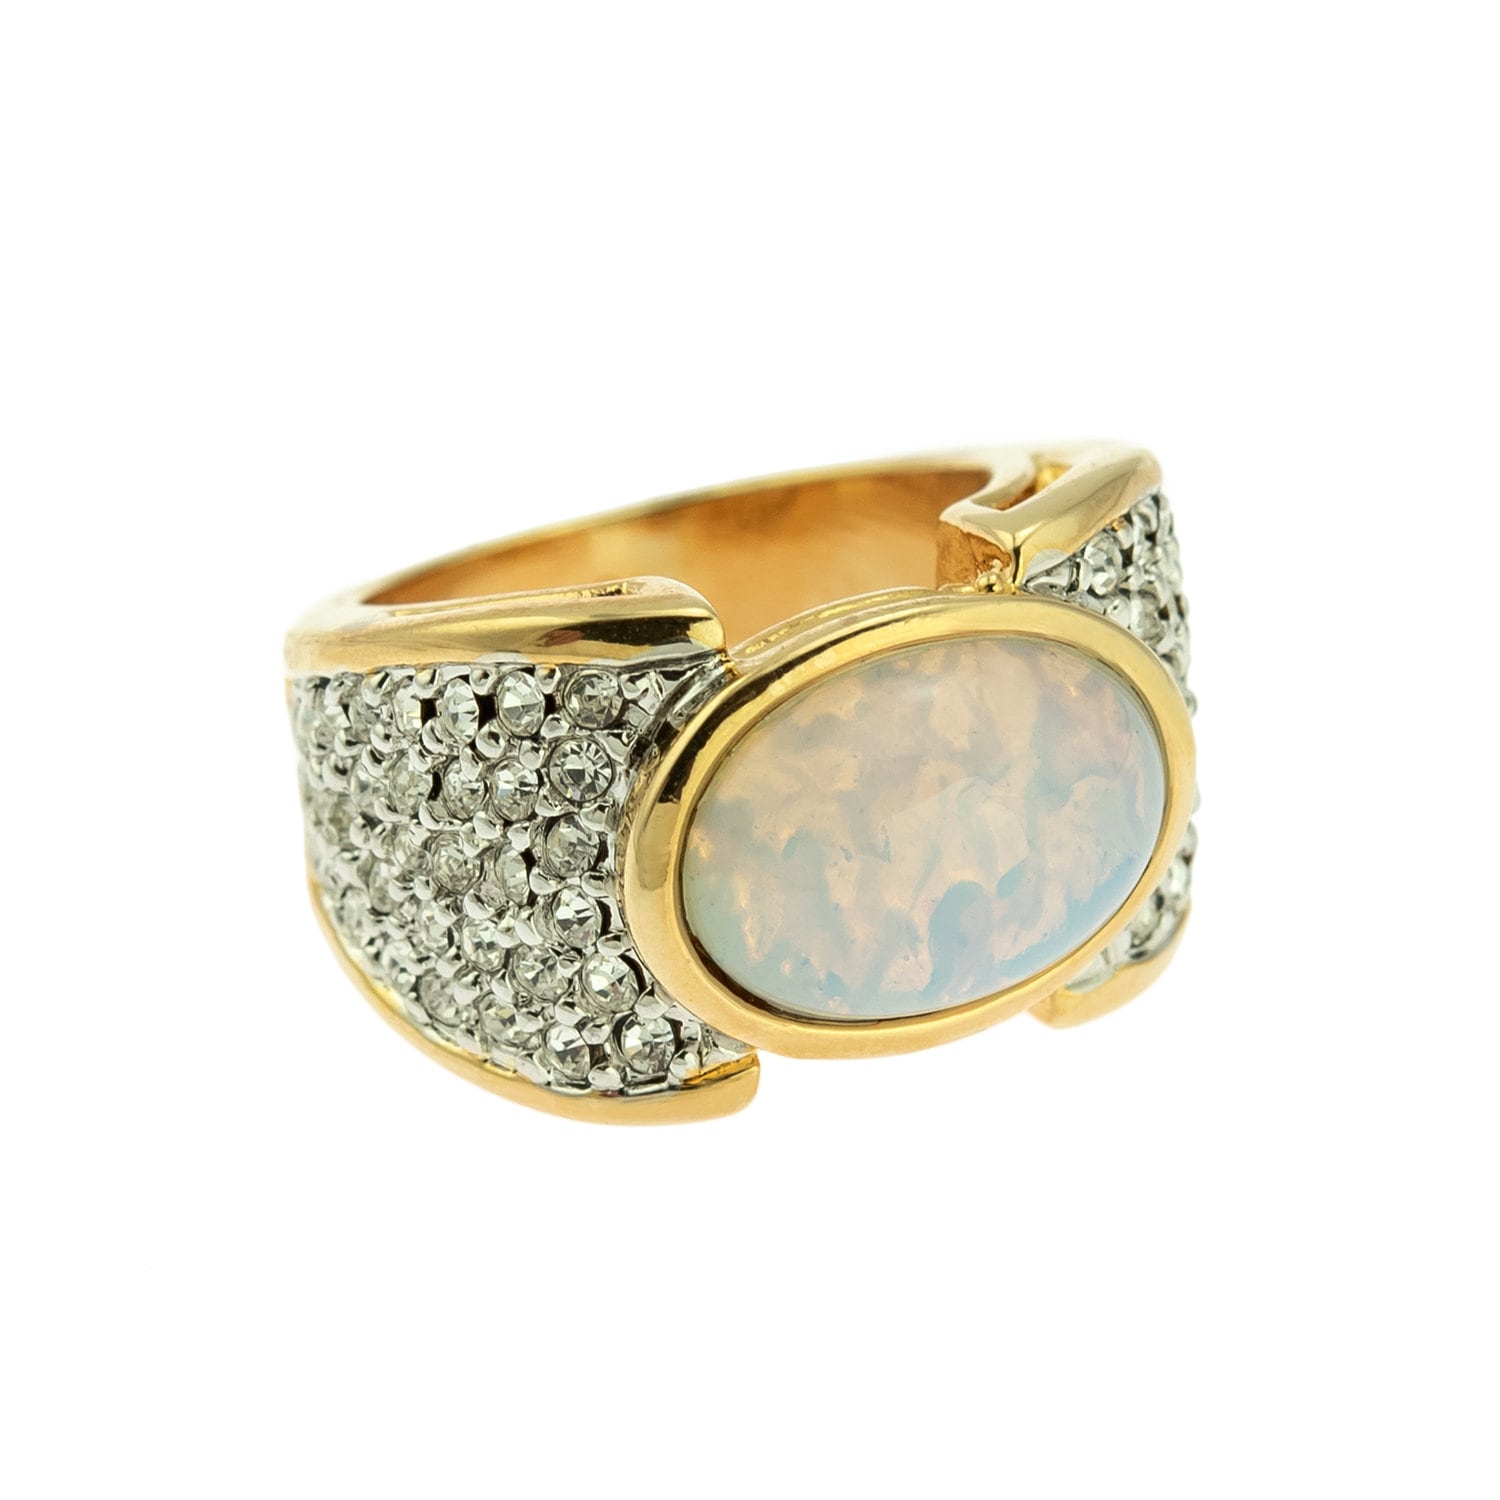 Vintage Ring Genuine Pinfire Opal and Clear Swarovski Crystal Cocktail Ring 18k Gold Antique Jewelry for Women R1934